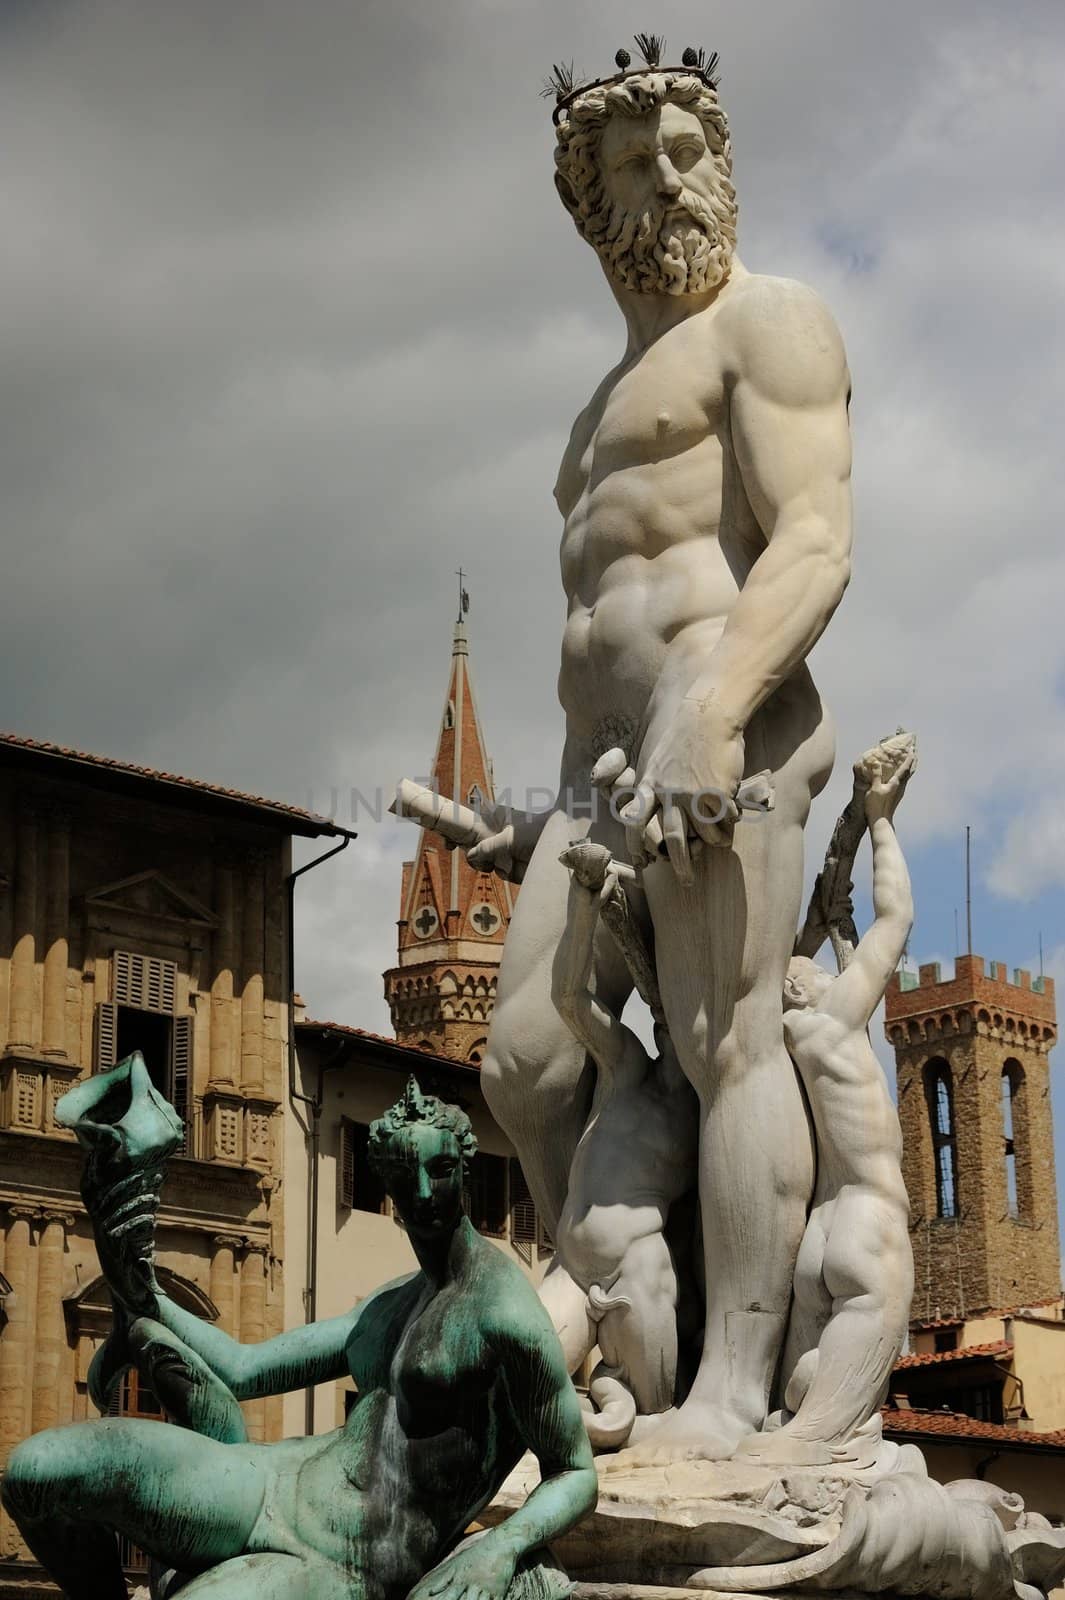 A mirable sculputure in the italian open air of Tuscany